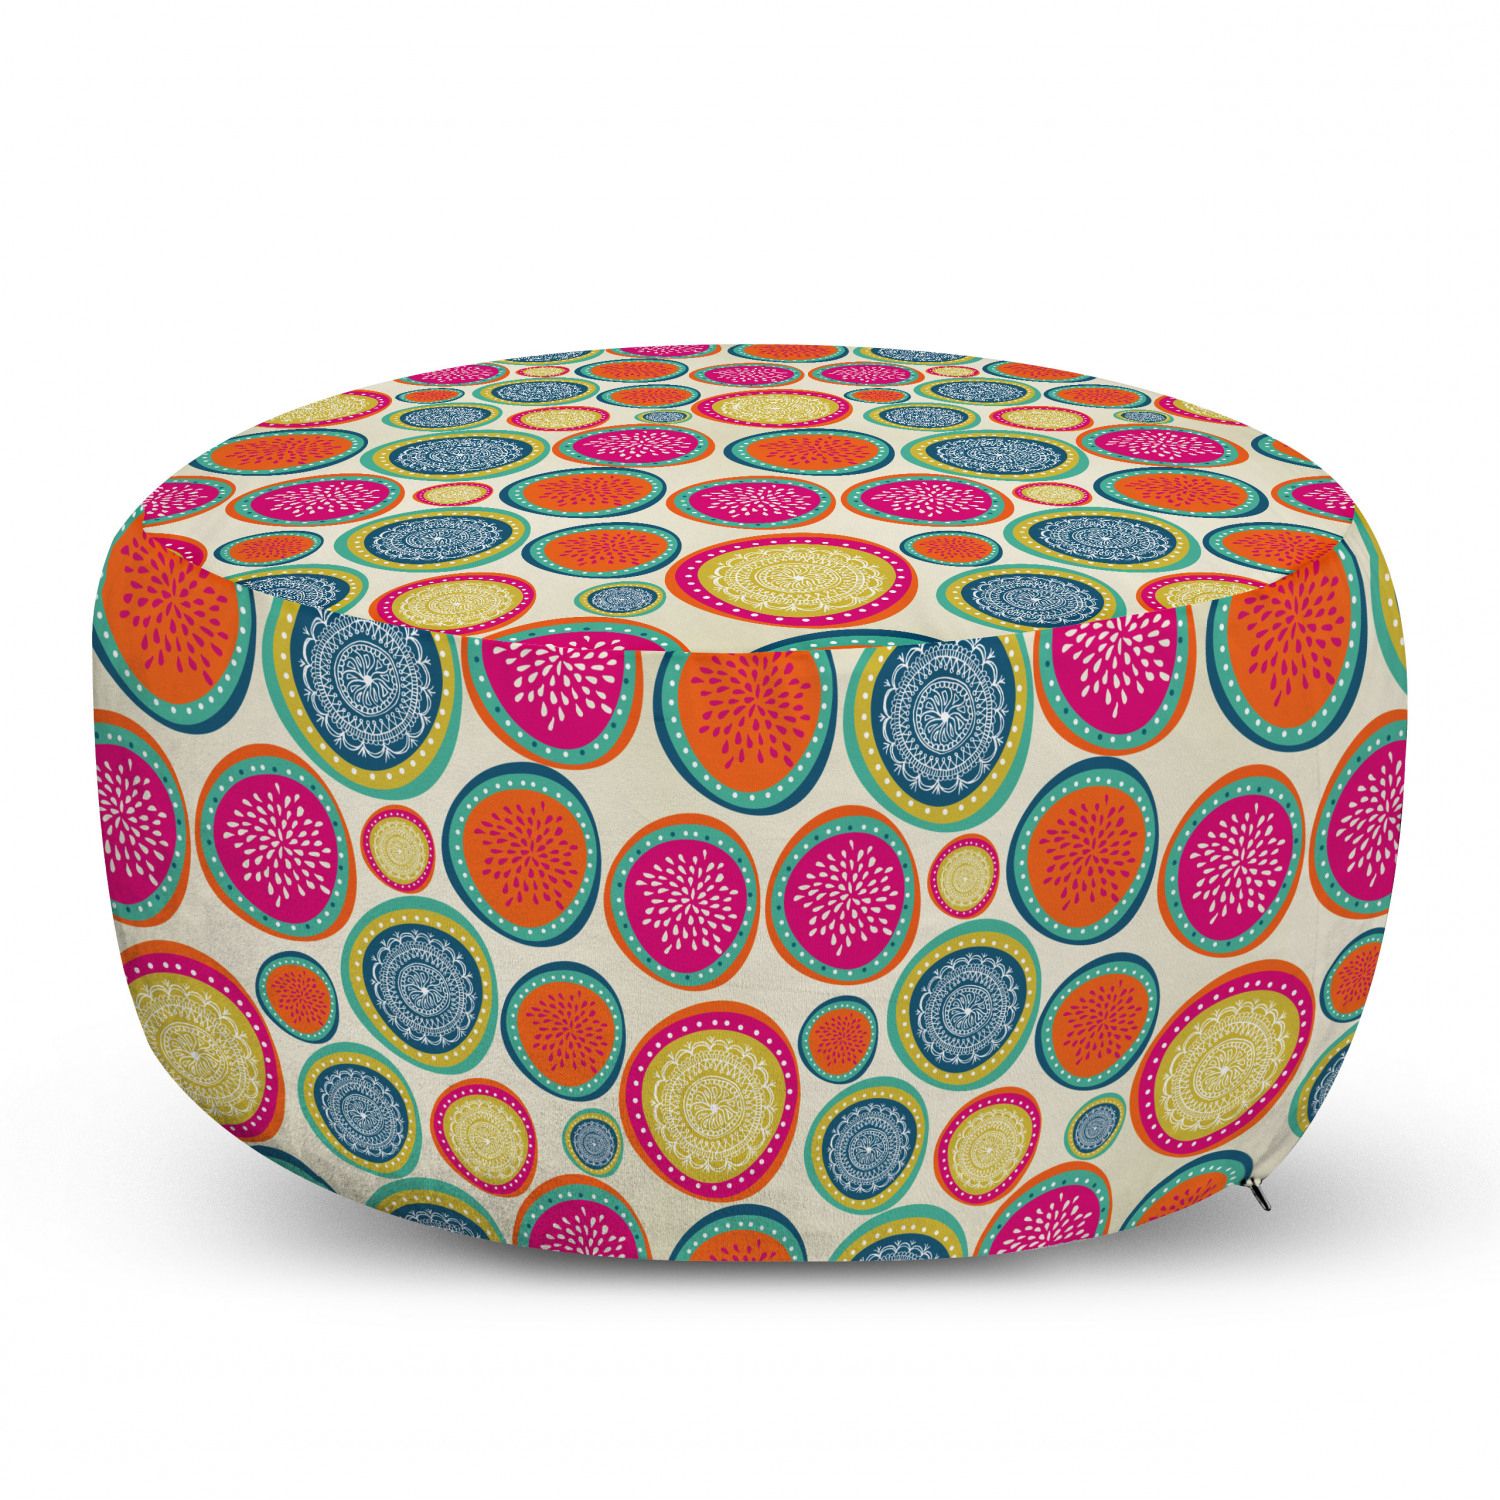 Colorful Ottoman Pouf, Doodle Style Lively Colored Round Shapes With And  Floral Motifs, Decorative Soft Foot Rest With Removable Cover Living Room  And Bedroom, Multicolor,ambesonne – Walmart With Multicolor Ottomans (View 7 of 15)